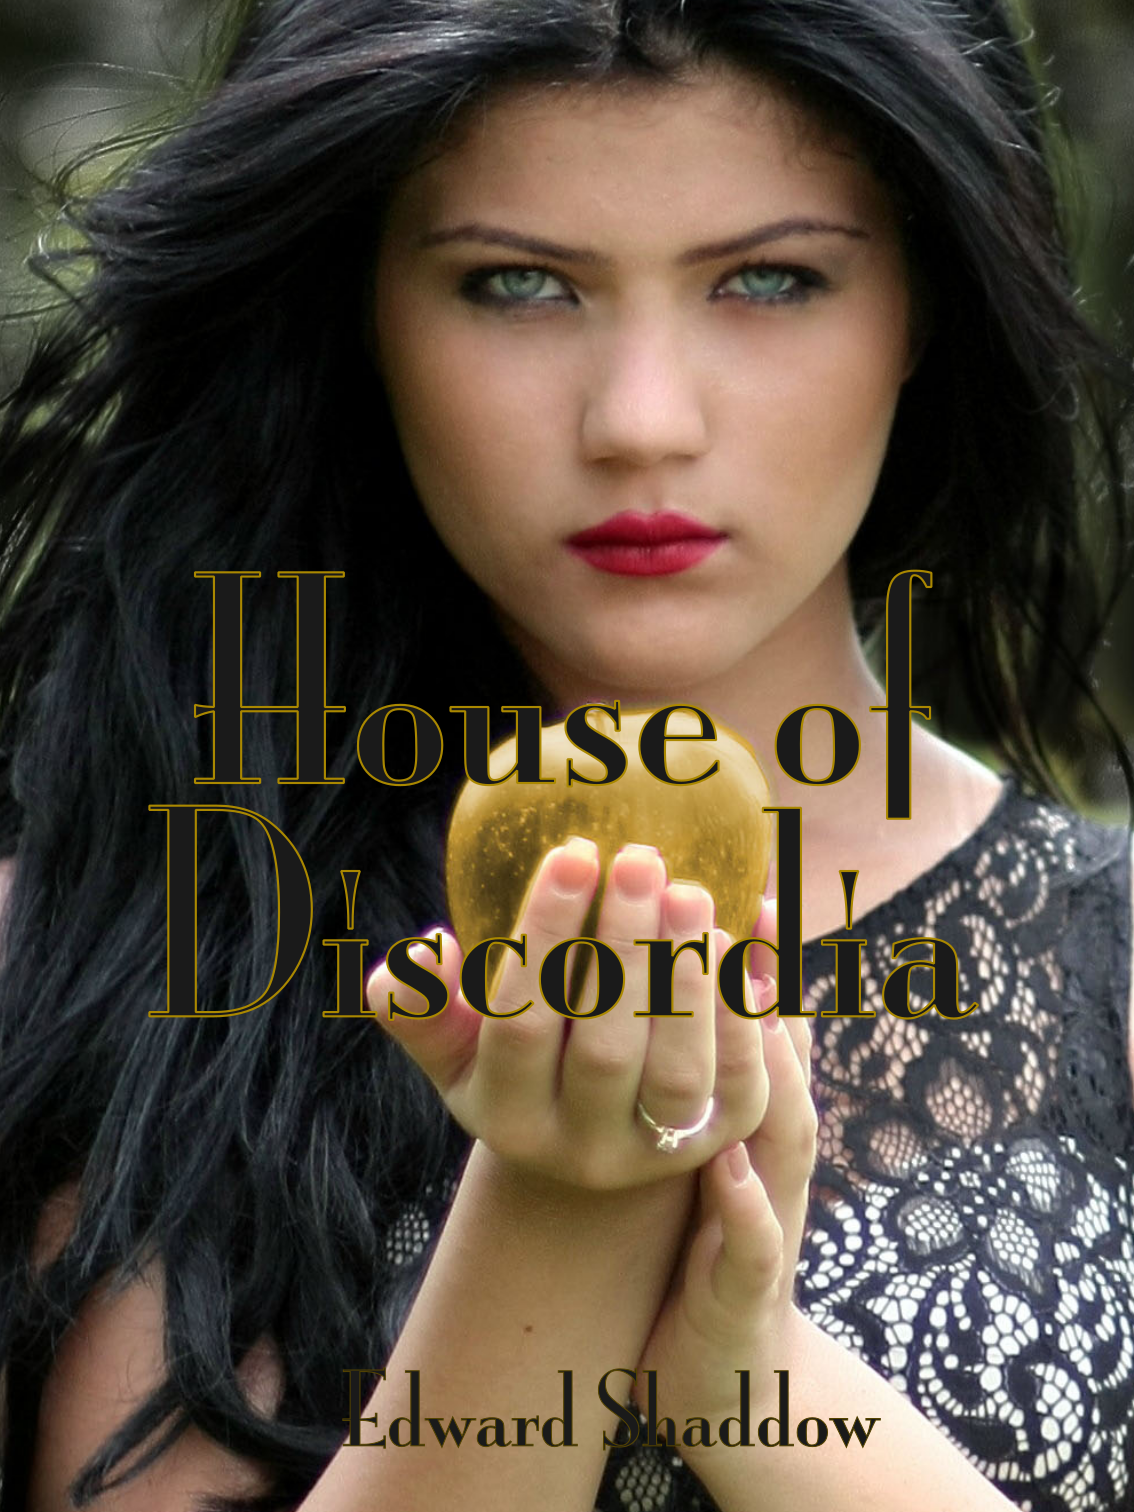 House of Discordia book cover with a woman with black hair holding a golden apple